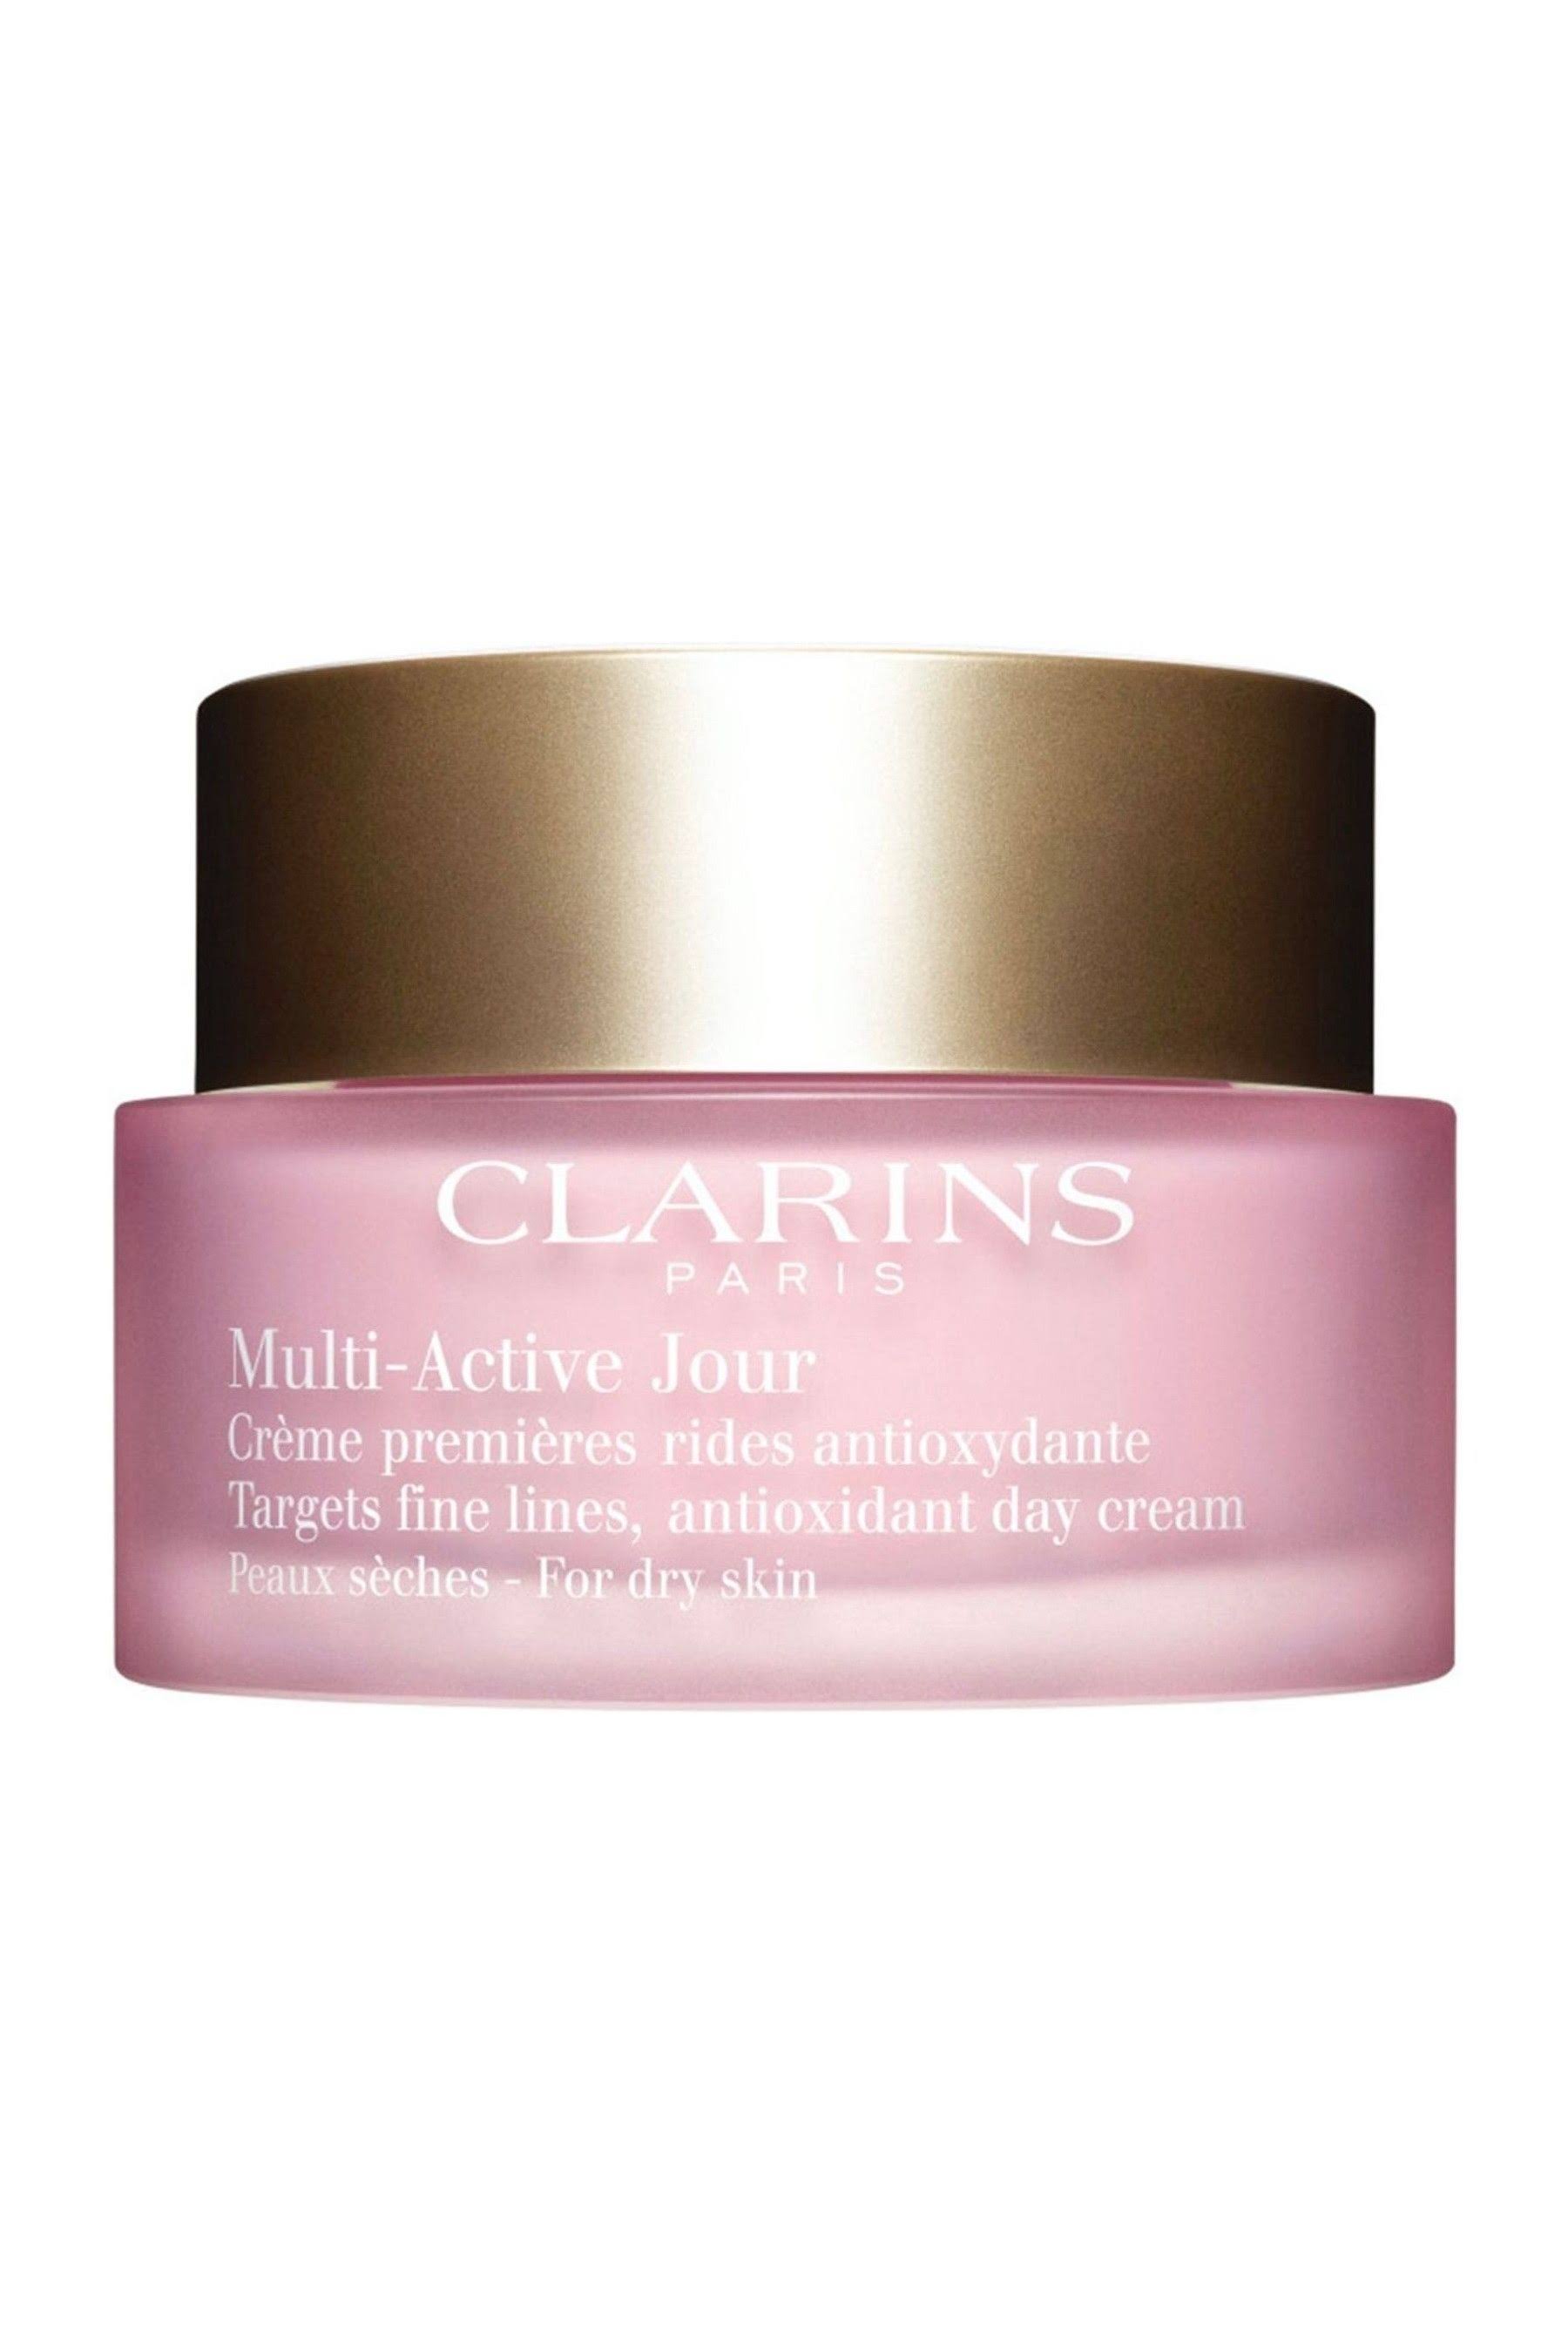 Clarins Multi-Active Day Cream for Dry Skin - 50ml